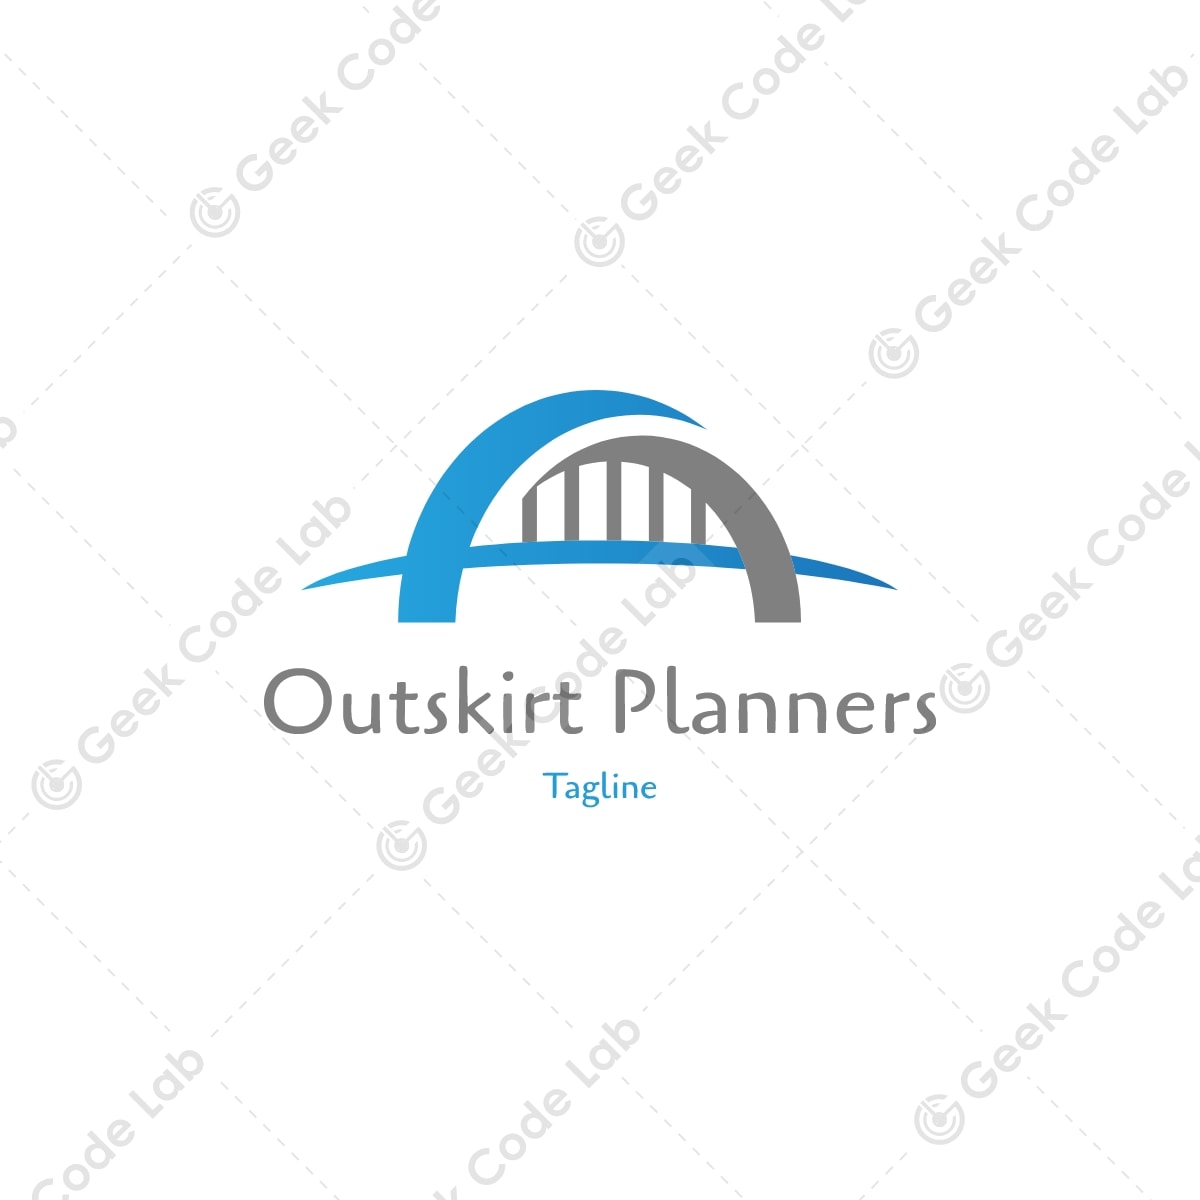 Outskirt Planners